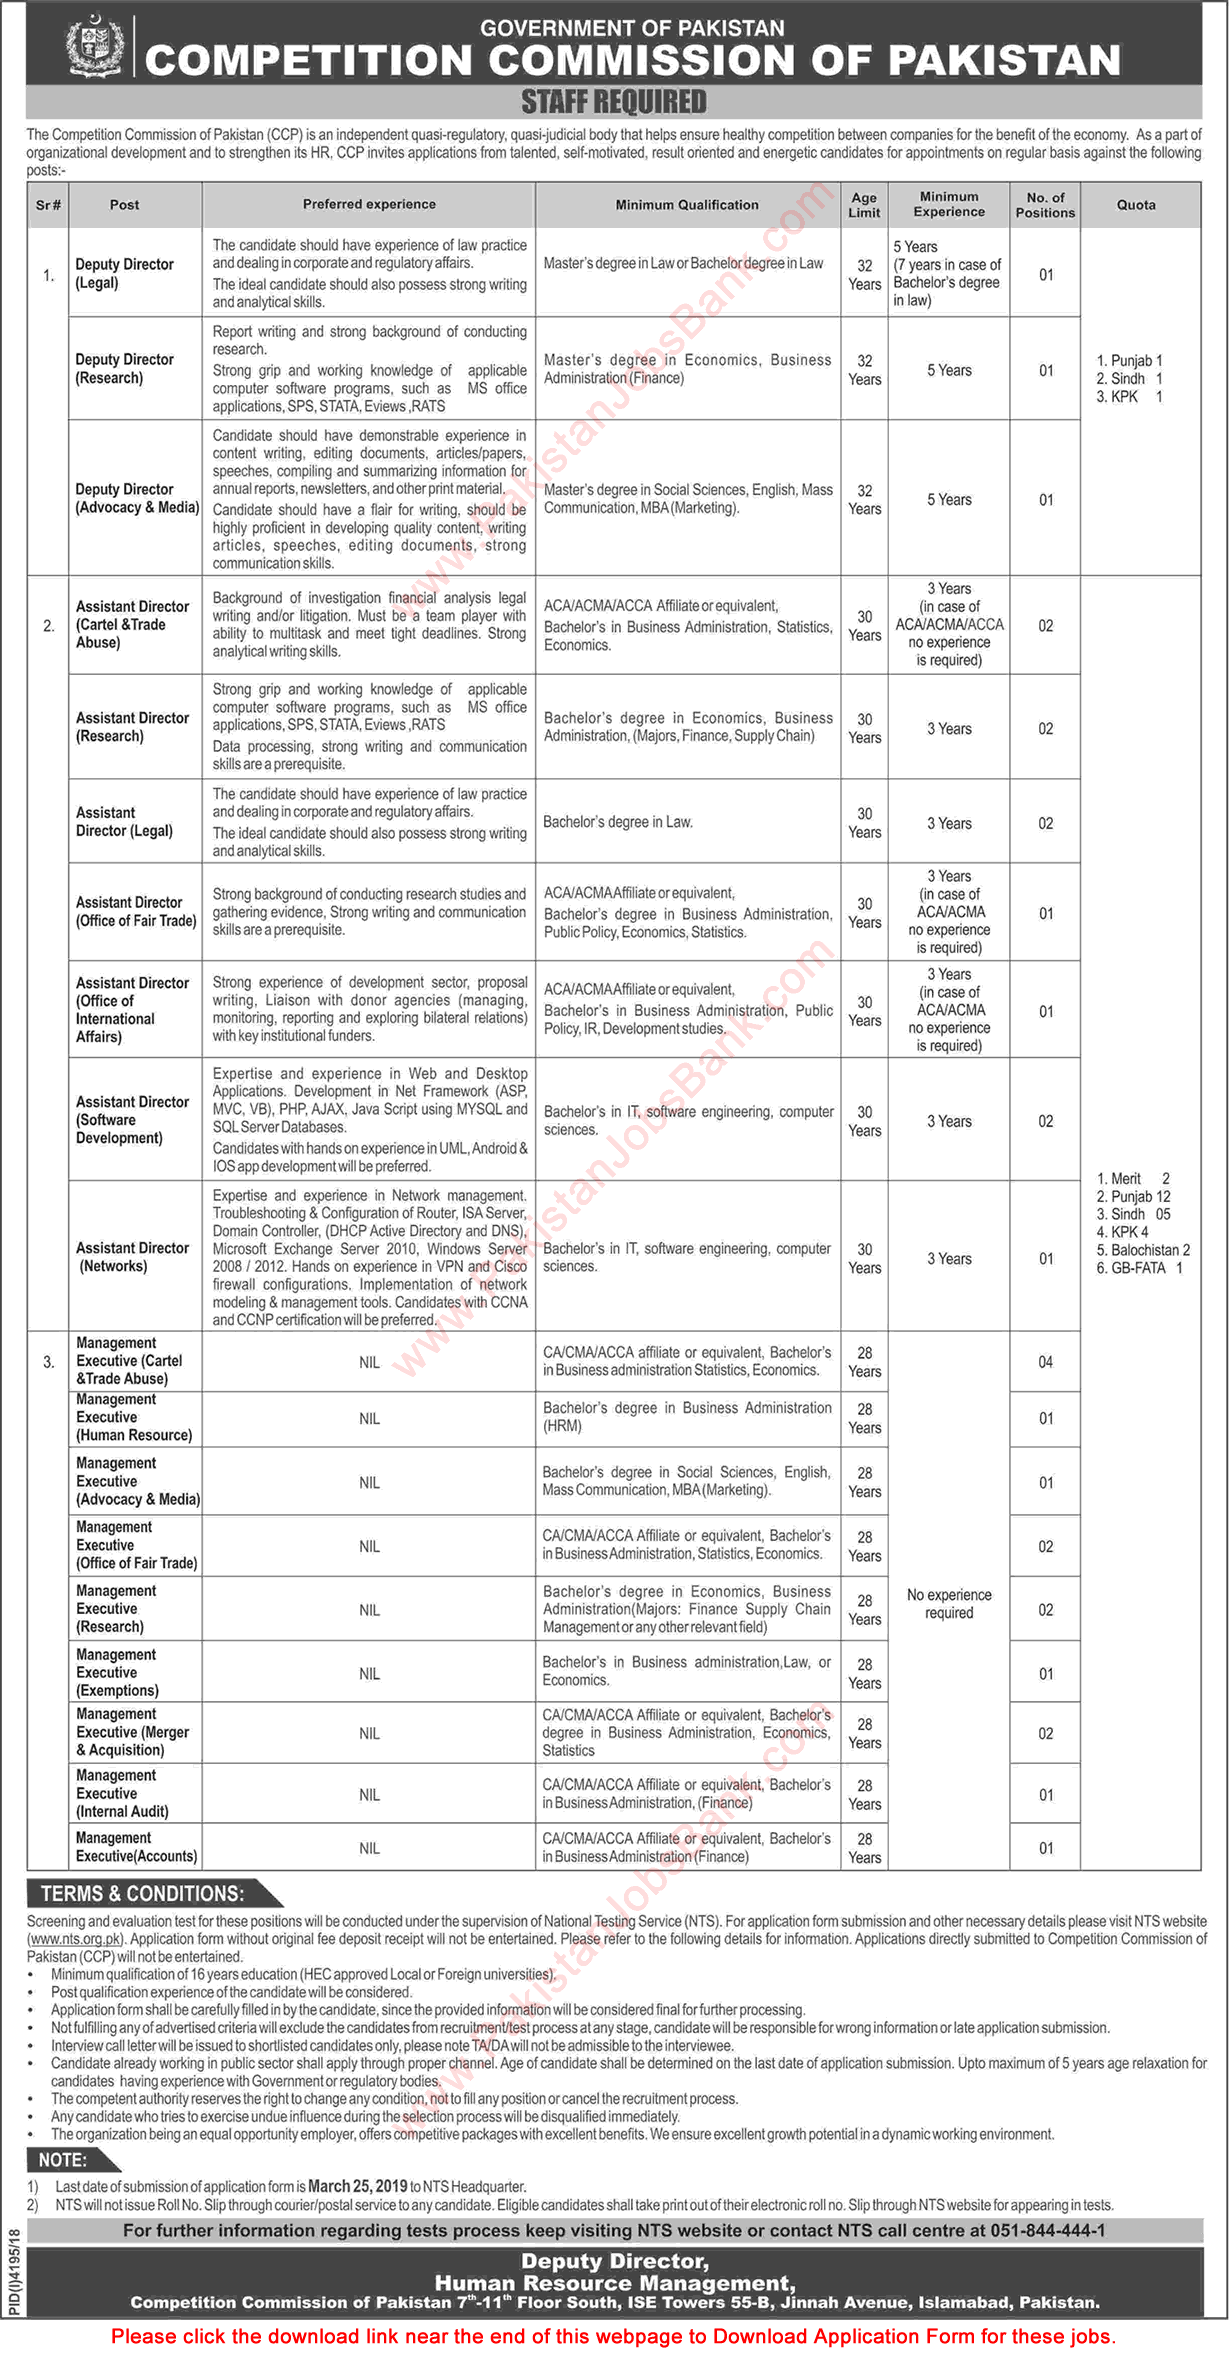 Competition Commission of Pakistan Islamabad Jobs 2019 March NTS Application Form Management Executives & Others Latest